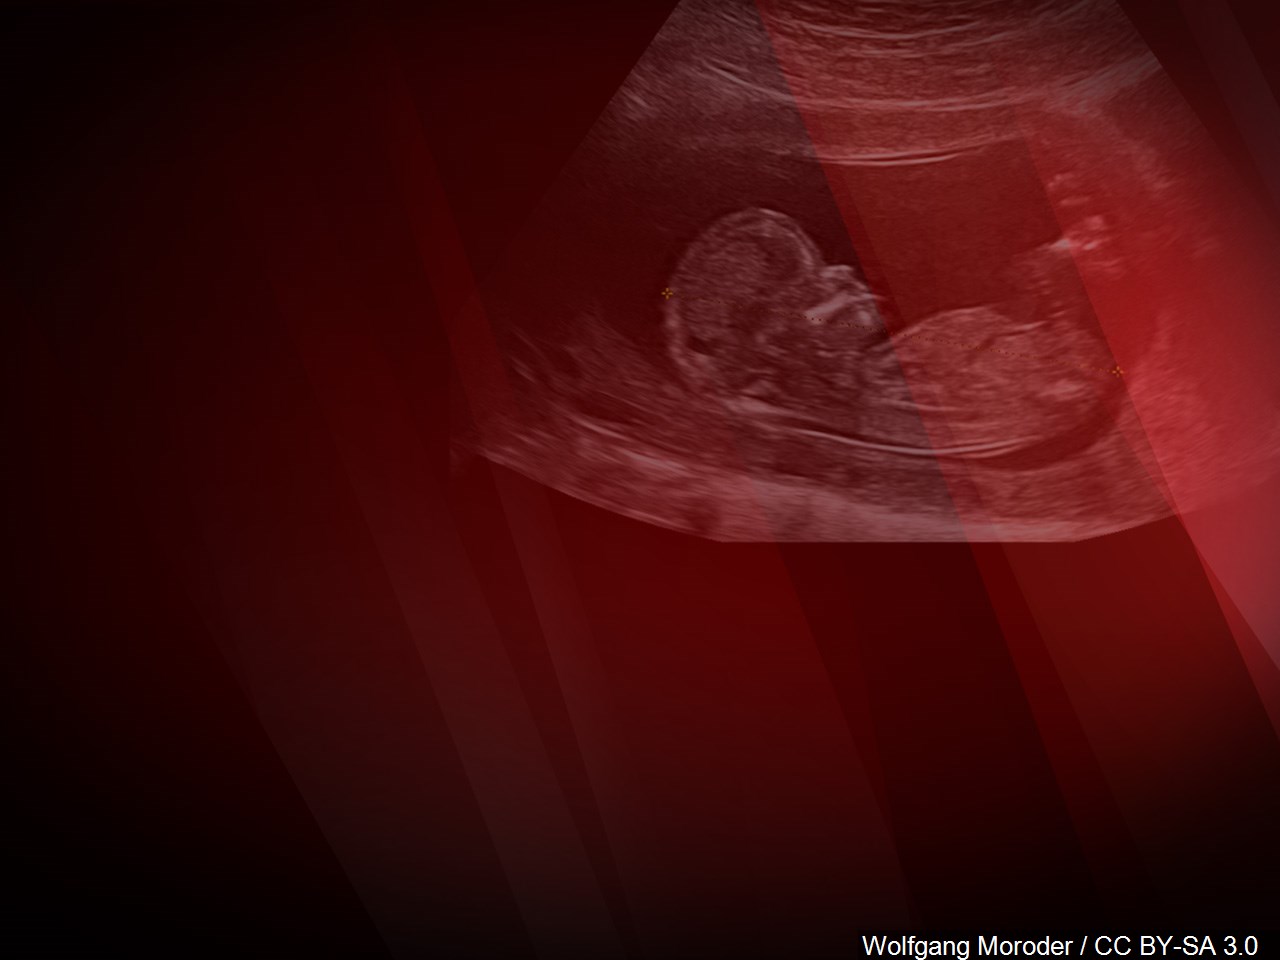 Alabama hires expert to help in abortion lawsuit